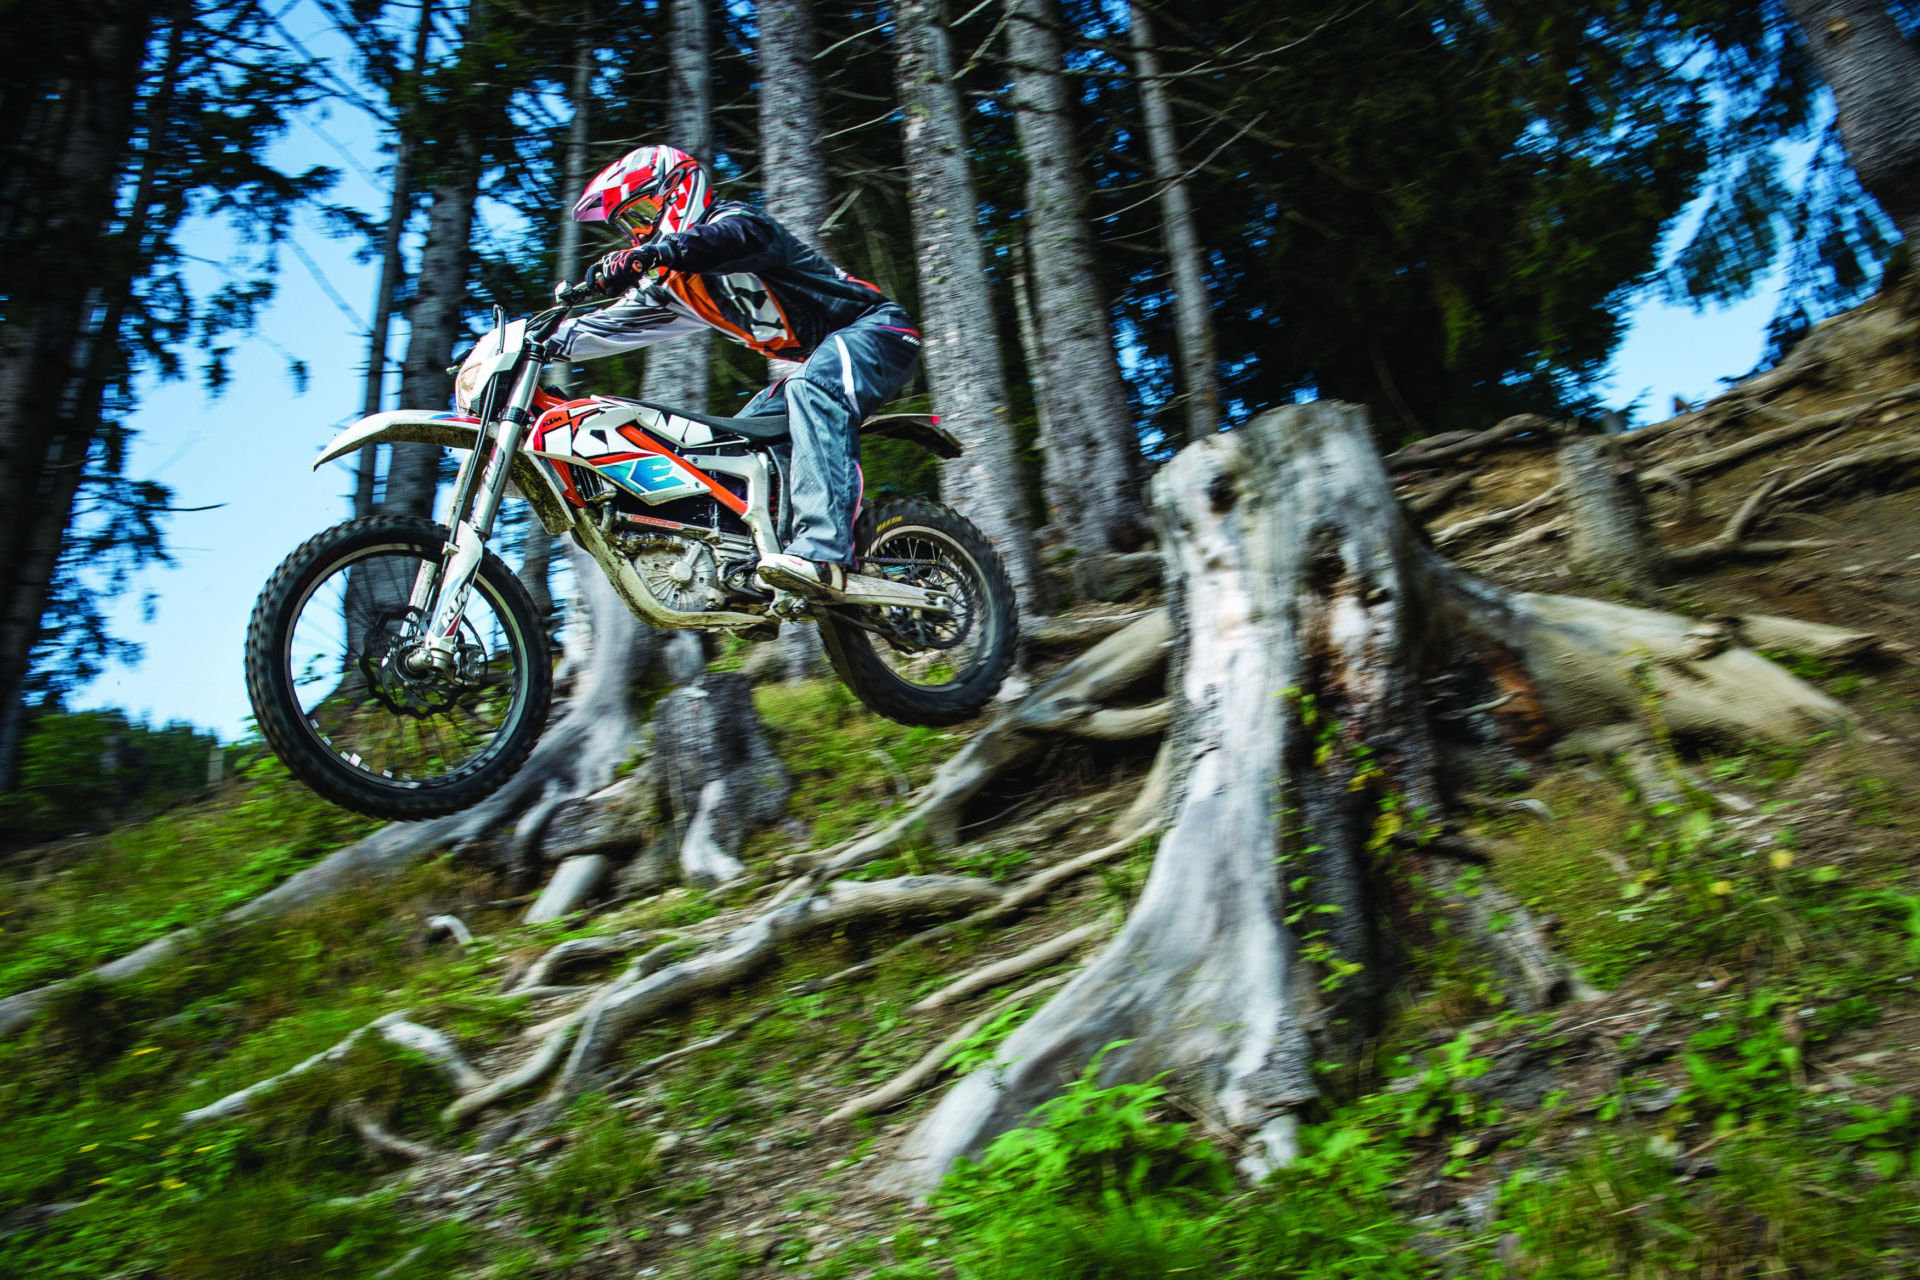 A KTM Freeride E-XC electric off-road bike in action. Photo courtesy KTM.